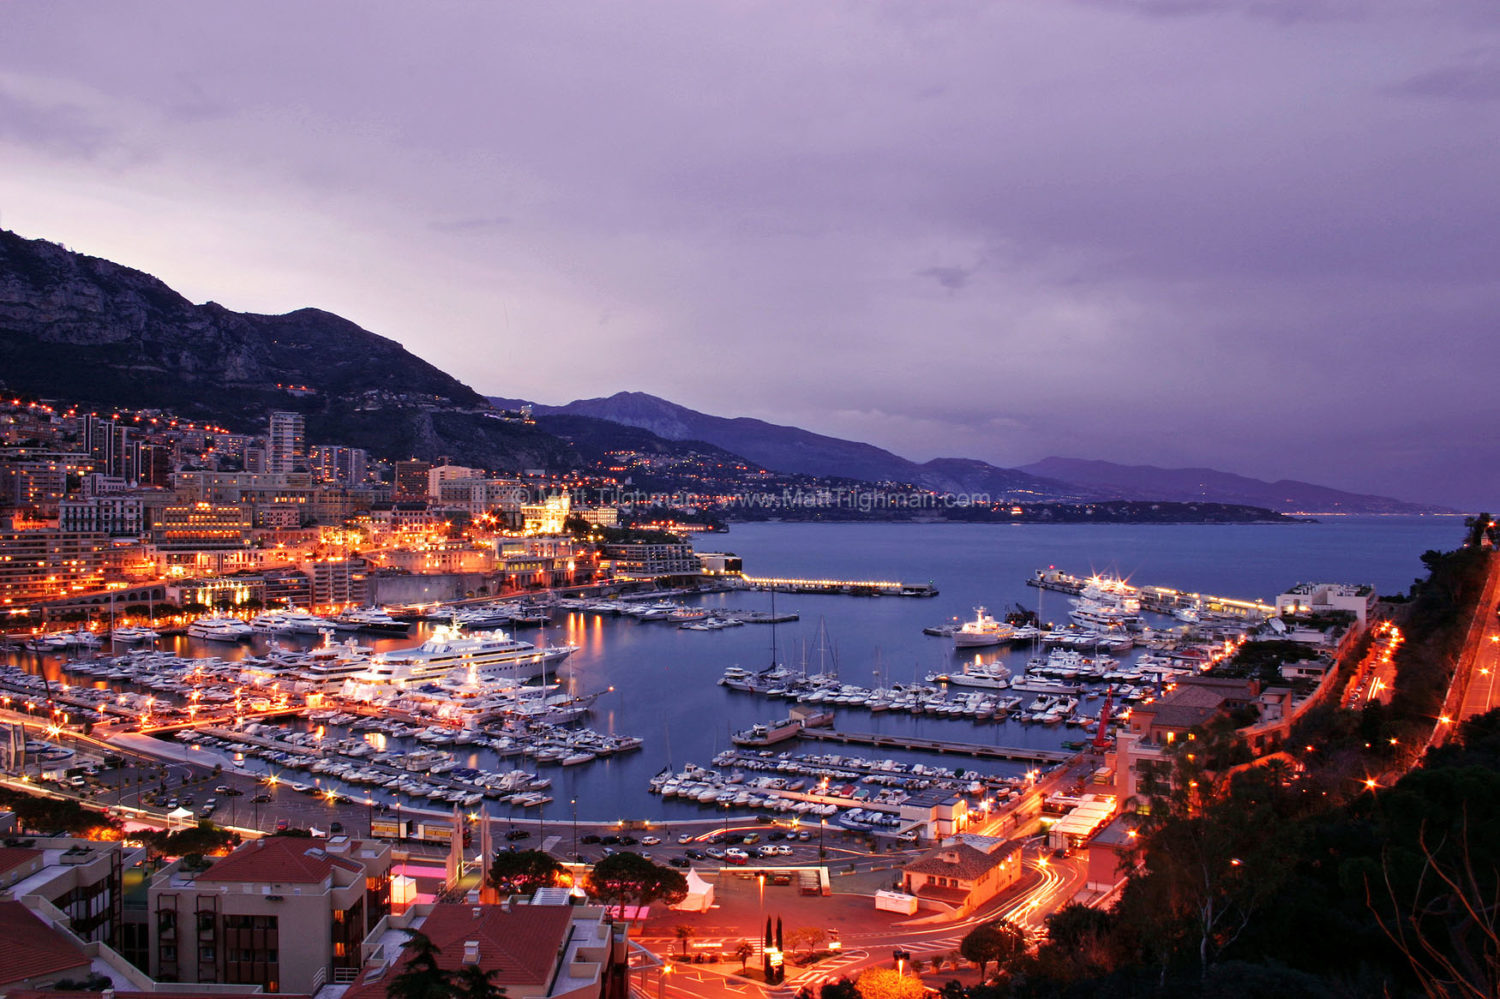 Fine art stock photo of Monte Carlo, Monaco, and the French Riviera. At twilight, the city begins to glimmer while the sea remains blue.